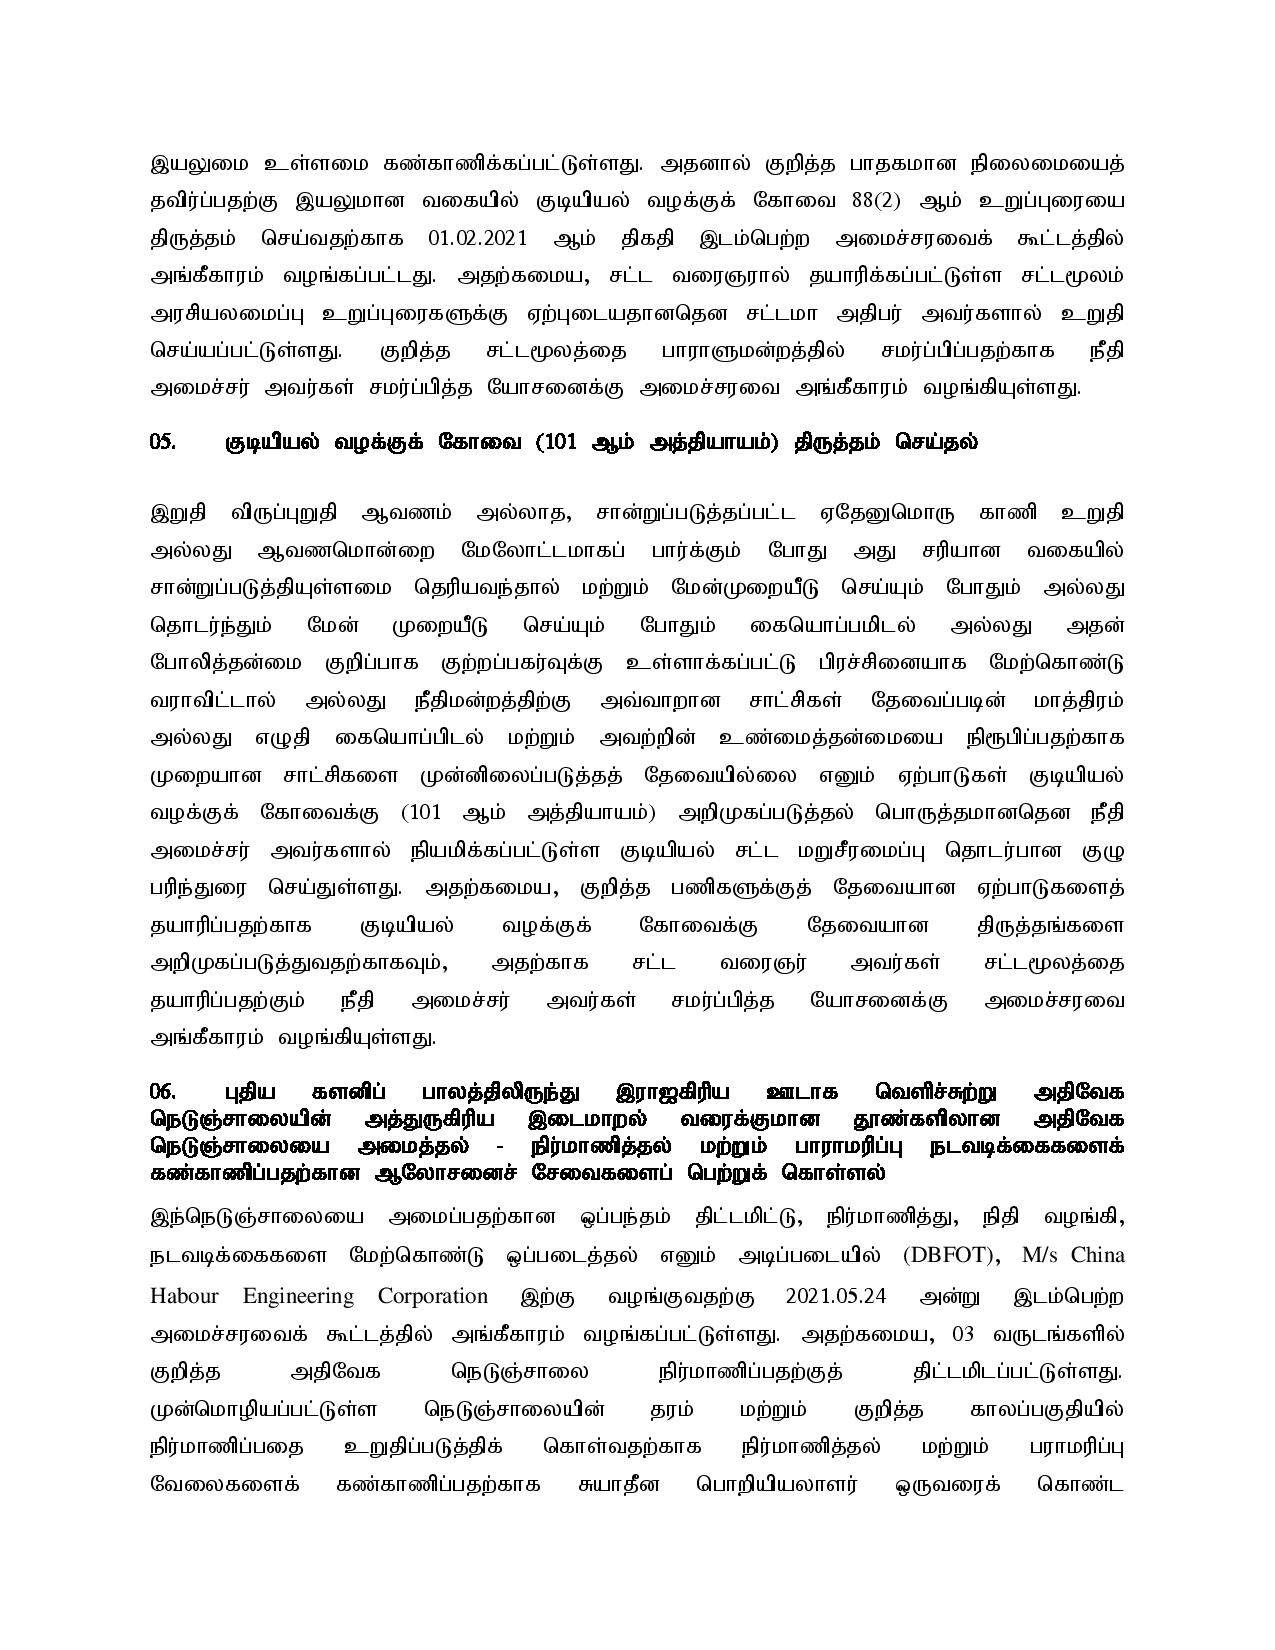 Cabinet Decision on 2021.09.13 Tamil page 003